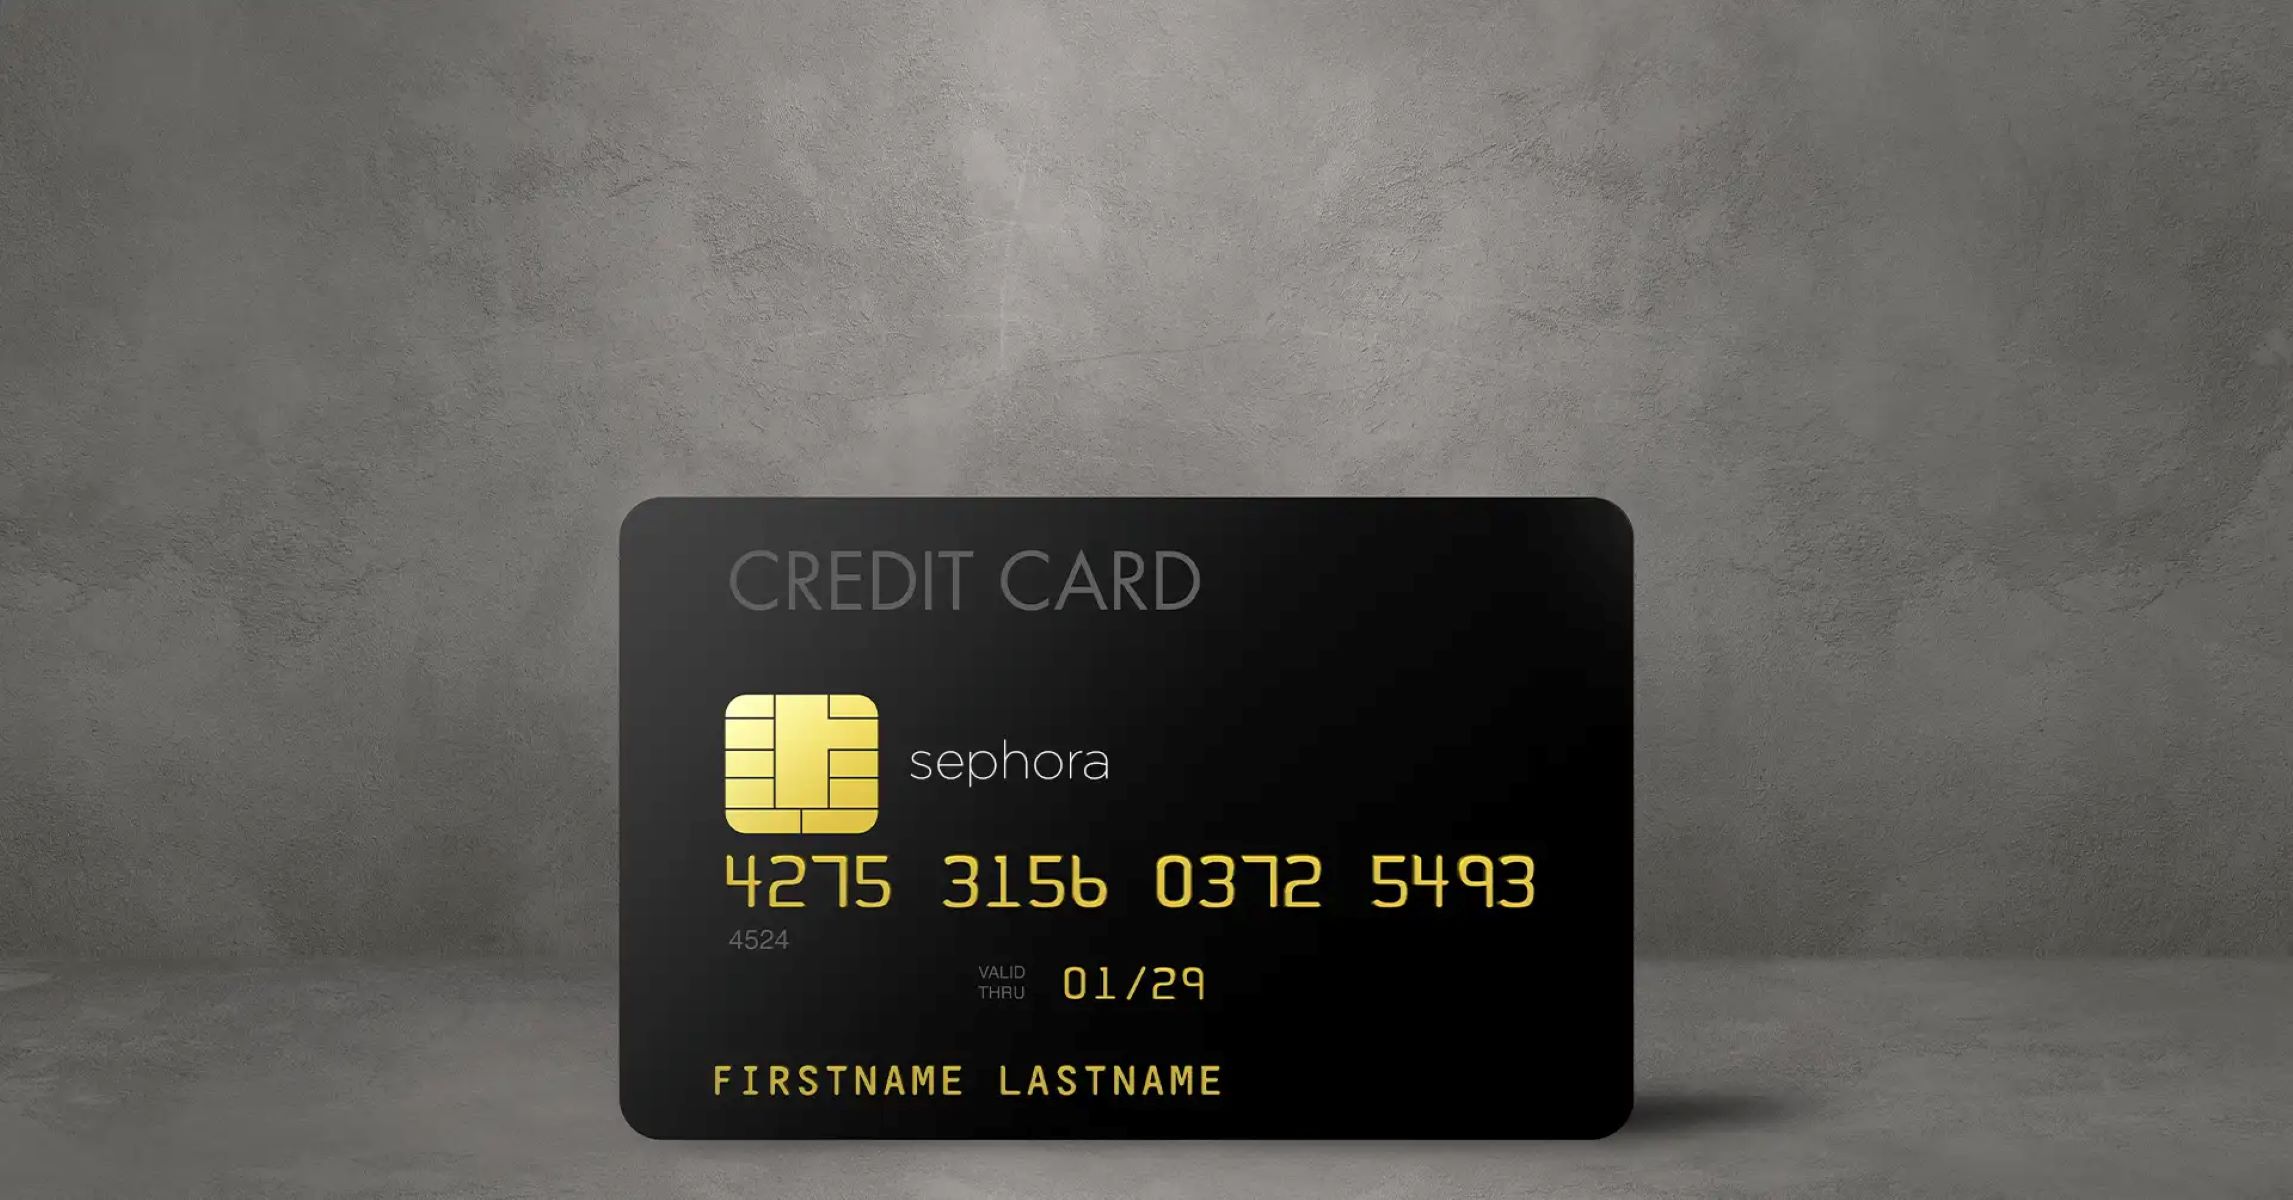 Who Is The Provider Of Sephora Credit Card